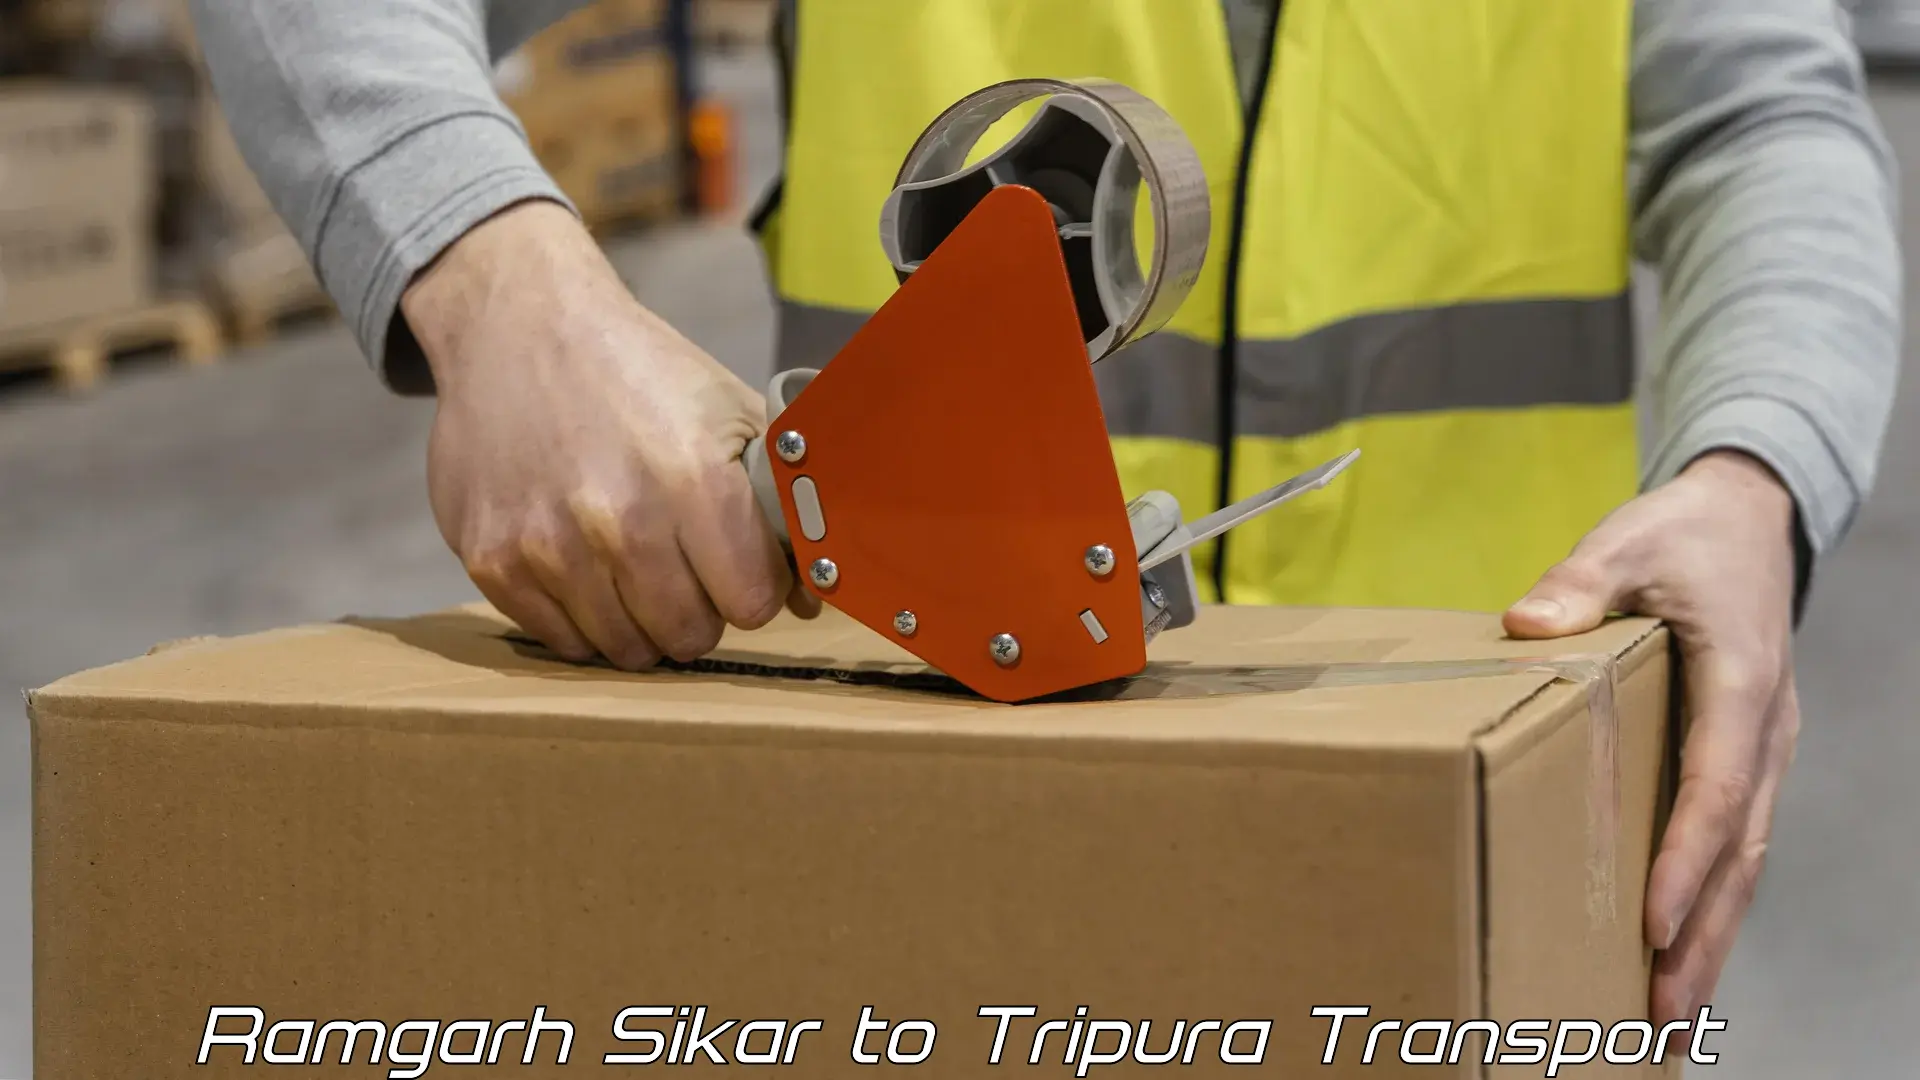 Road transport online services in Ramgarh Sikar to Udaipur Tripura